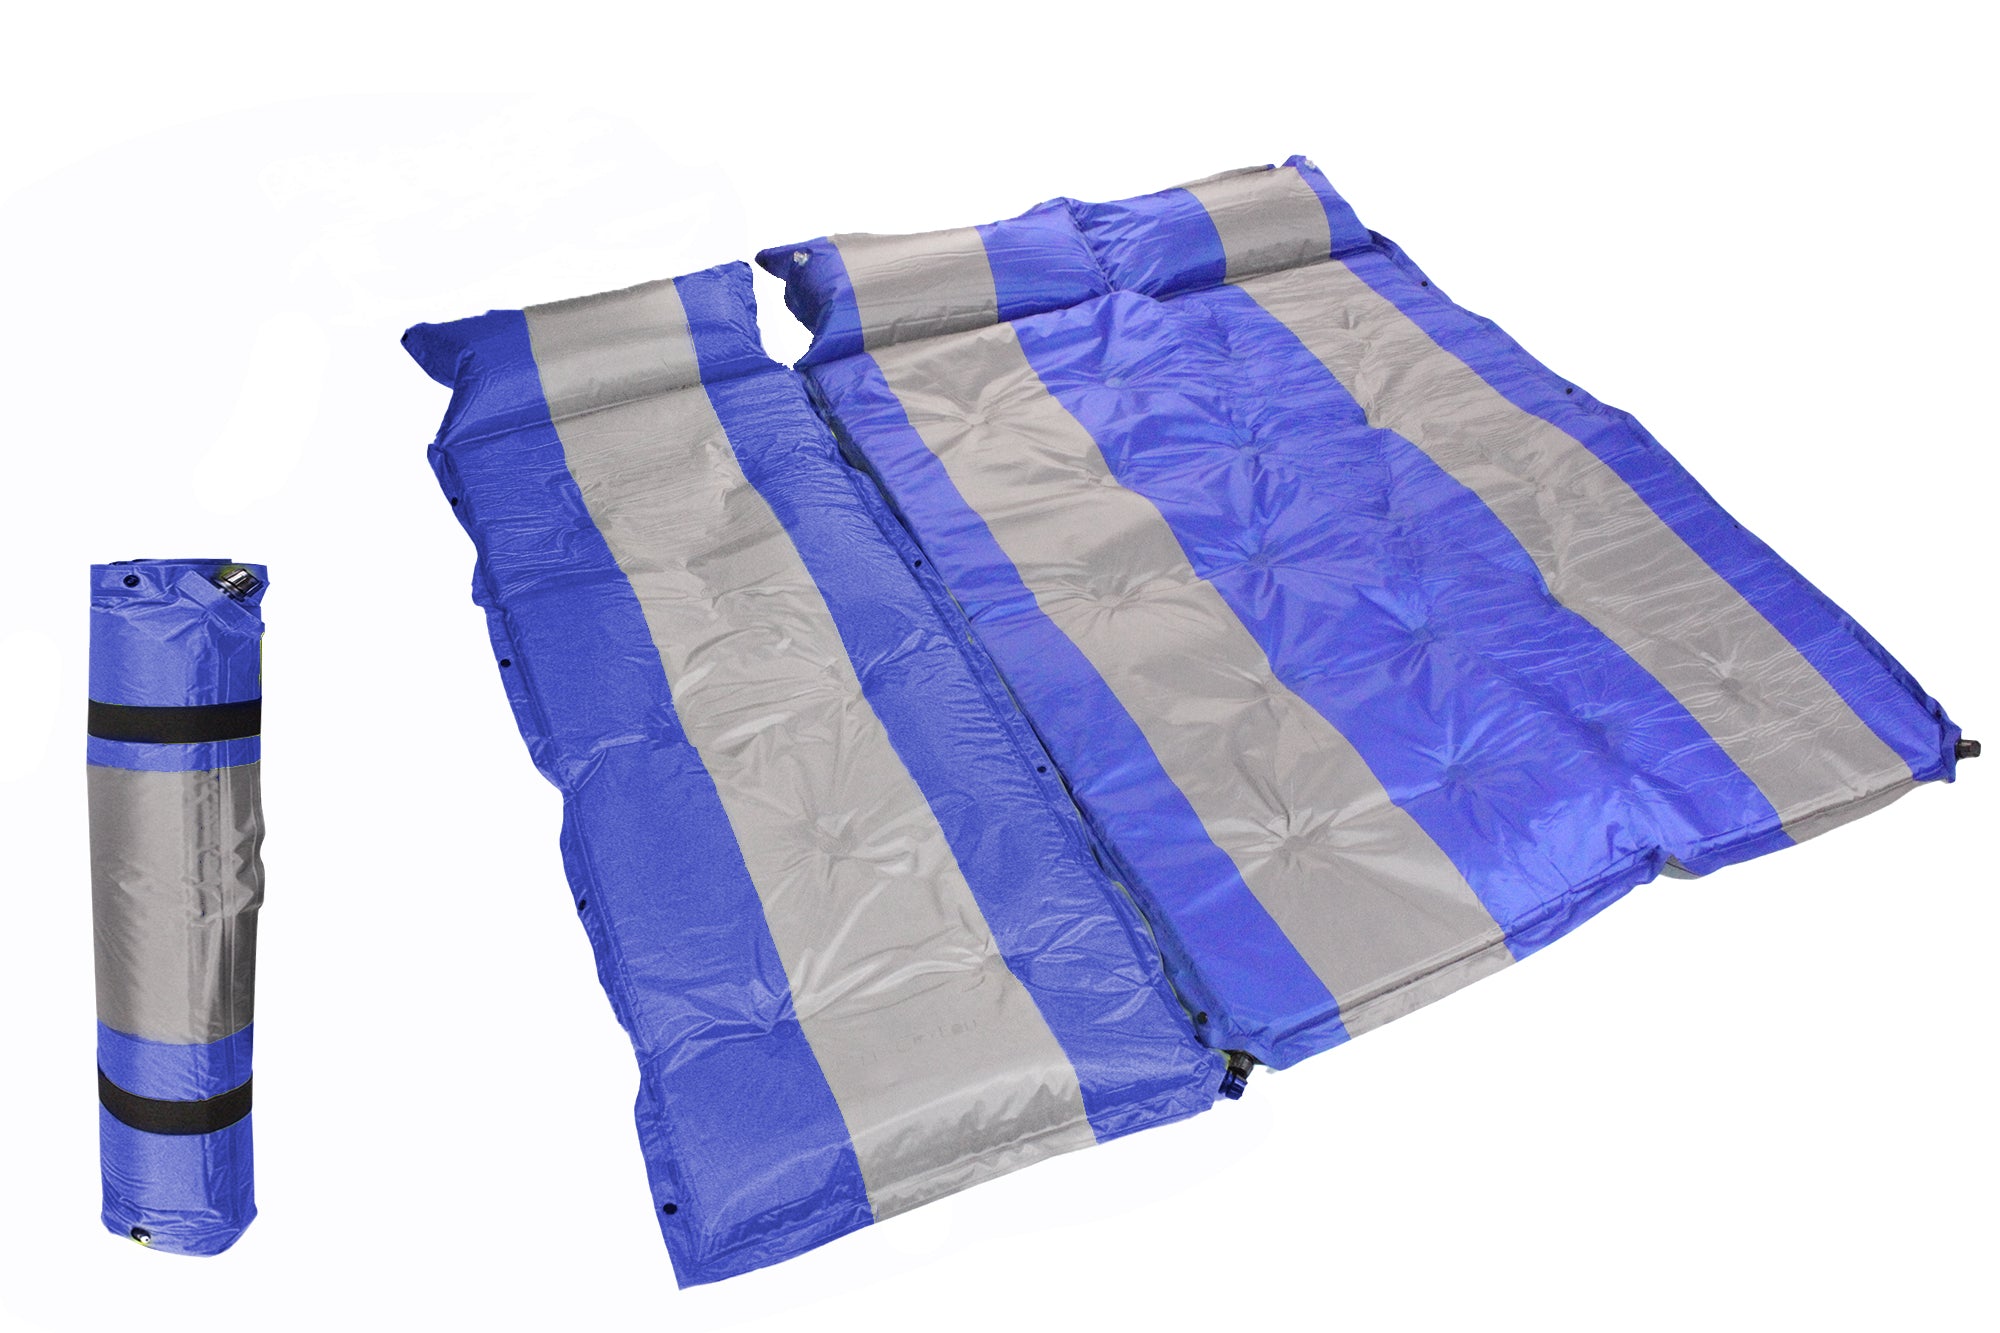 184x180cm Self-Inflating Triple Camping Mattress with Inflatable Headrests